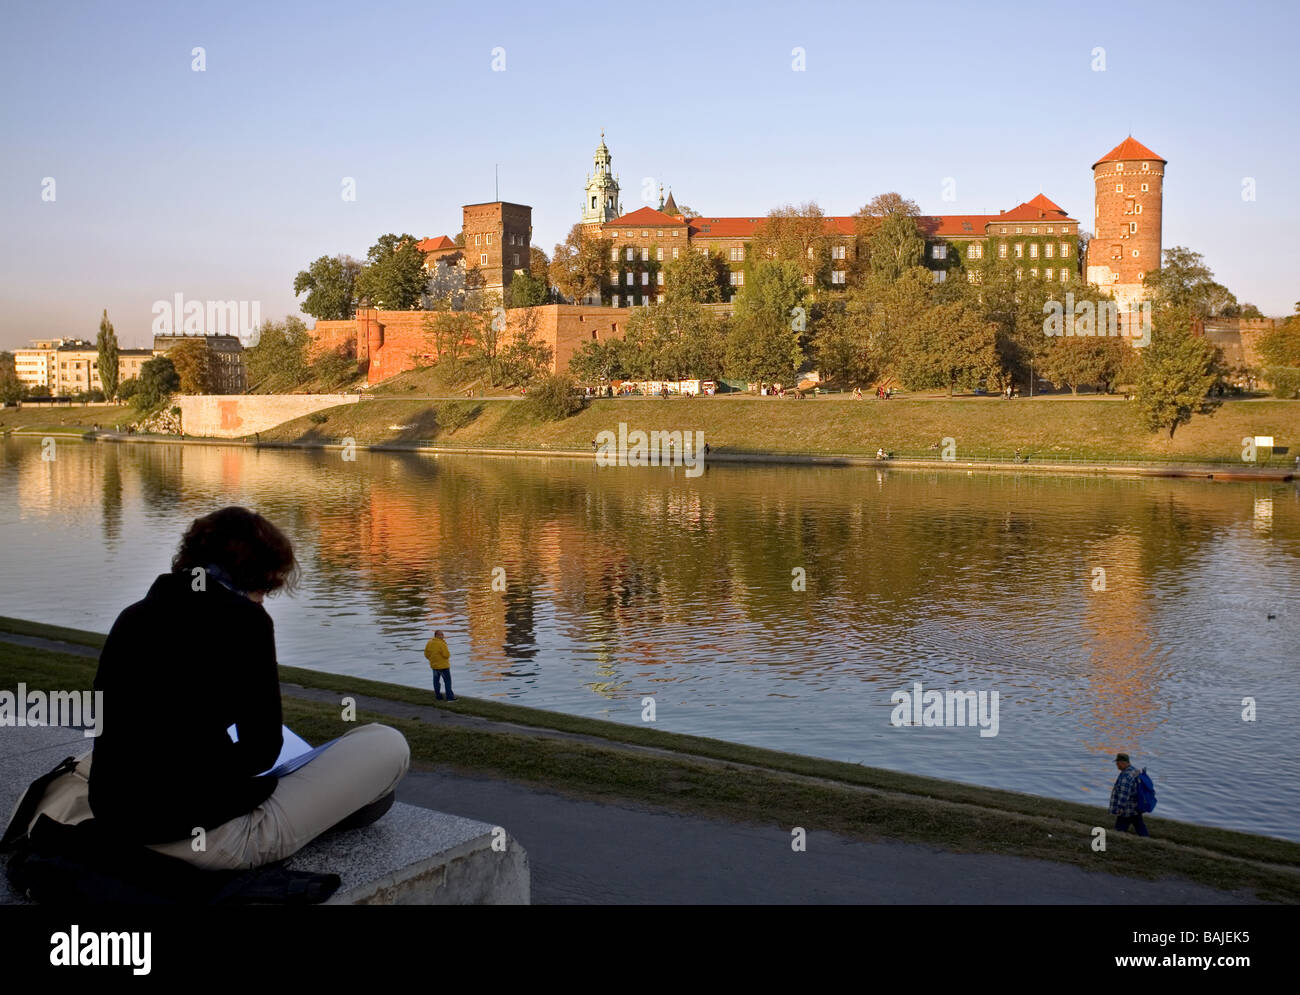 Vistula River and Wawel Castle in Cracow Poland Stock Photo